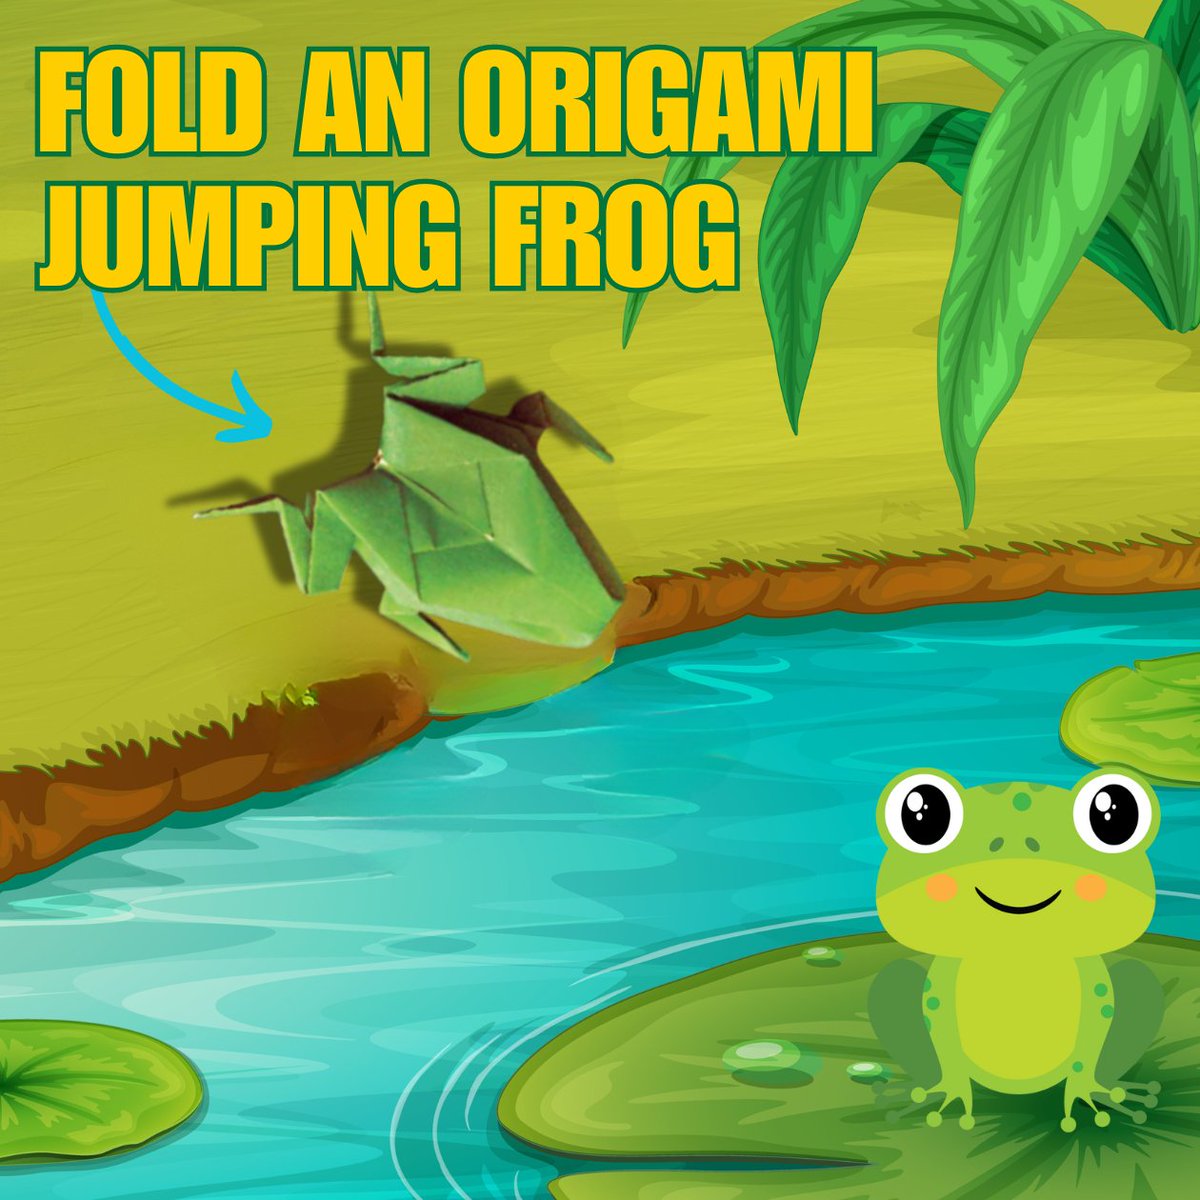 Did you know that today is National Frog Jumping Day?! 🐸 In honor of this glorious occasion, we wanted to share some instructions on how to fold your own origami jumping frog! 😃 🤲 Grab your favorite Tuttle origami paper & hop on over to the tutorial: l8r.it/J8w4